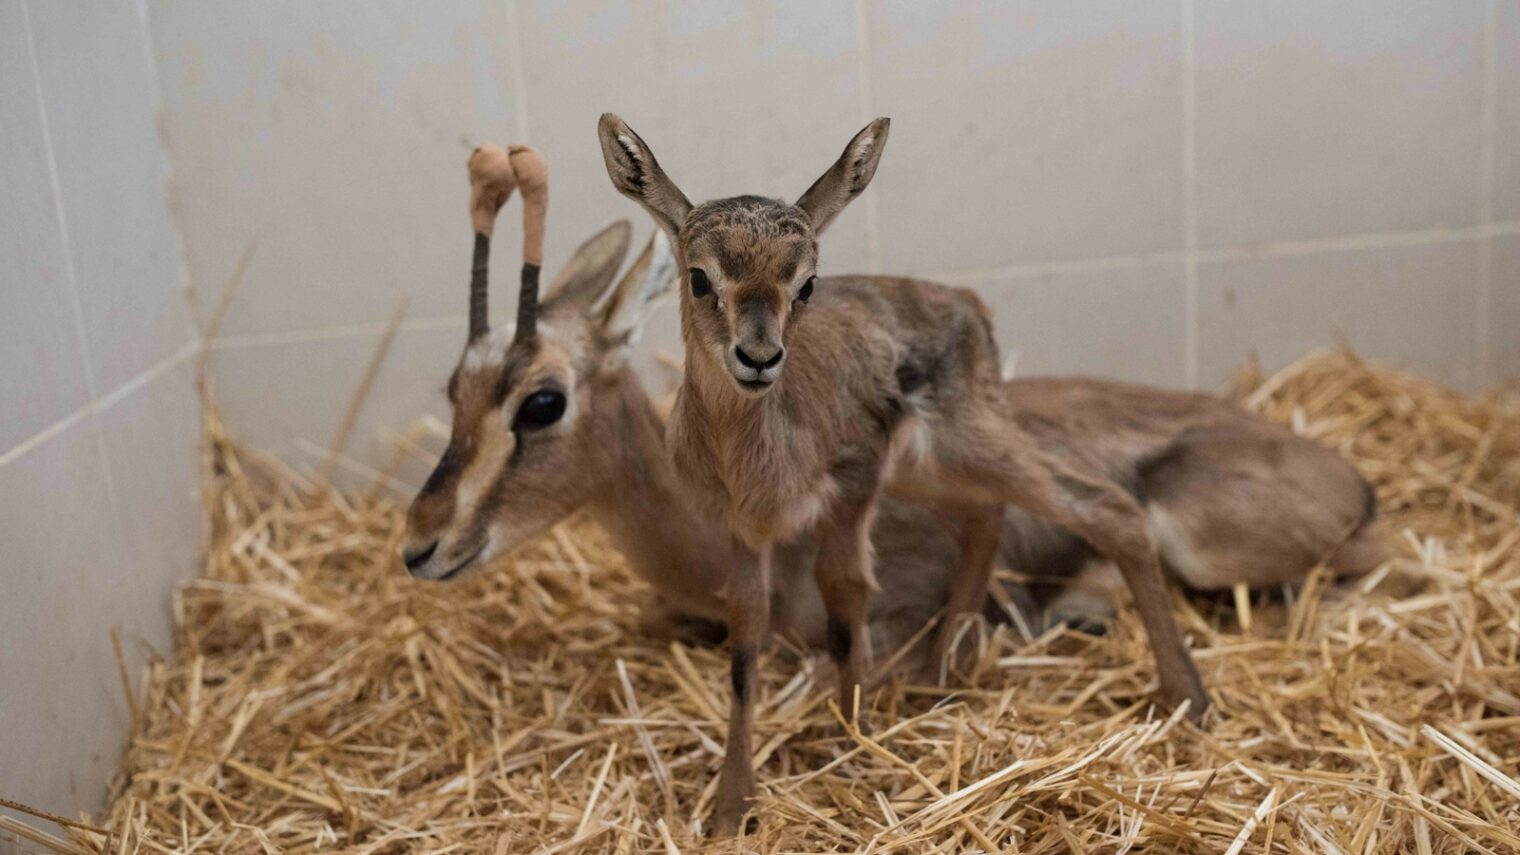 A wounded gazelle and a young deer are taken care of at the Israeli Wildlife Hospital. Photo by Ben Kelmer/FLASH90